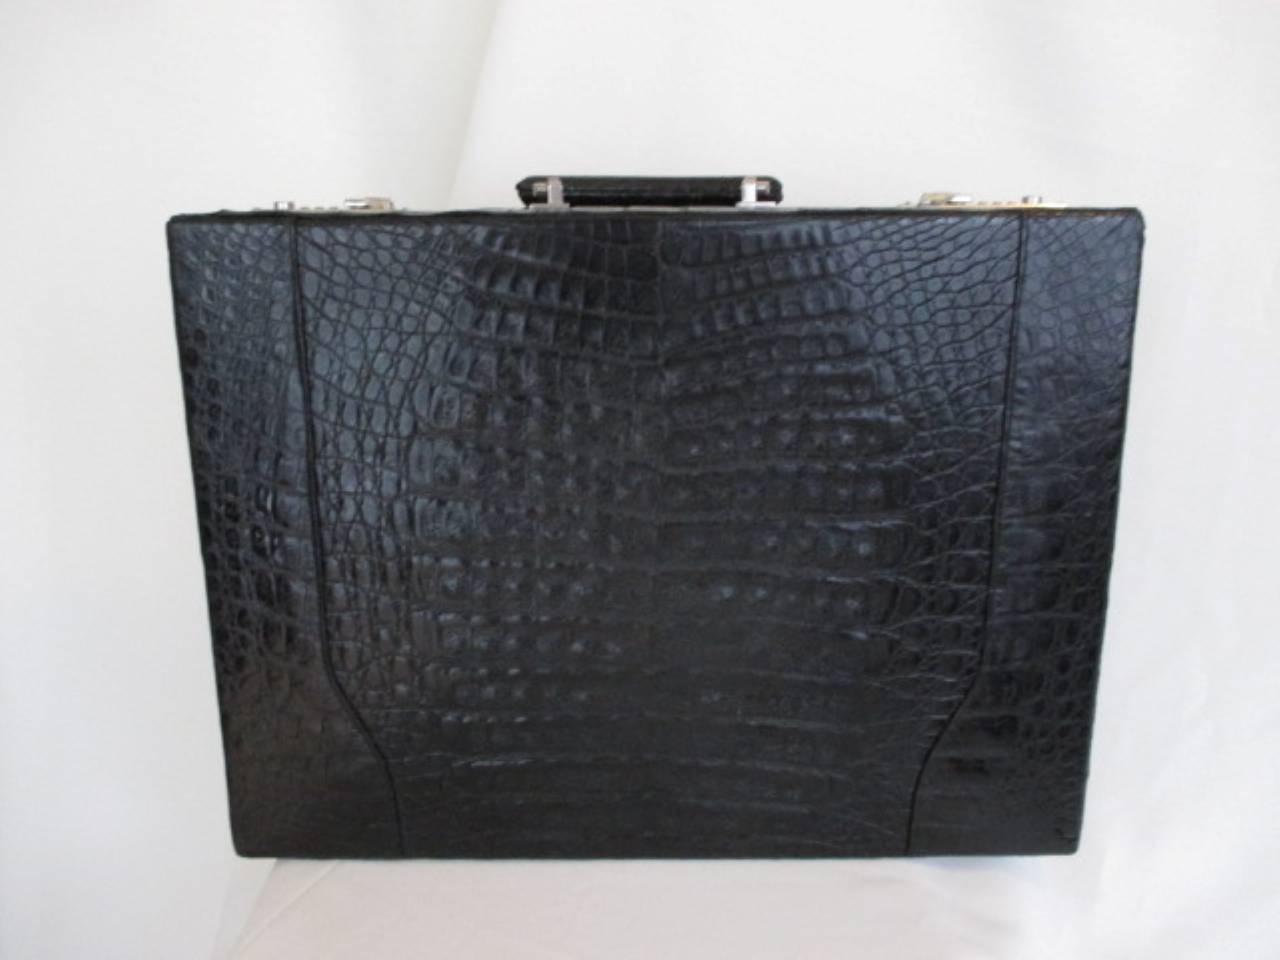 Rare hard-sided attache case made of finest black alligator belly.
Interior is leather with pockets and with hidden combination locks.
Marked:  IRV
Measurements: 46 cm x 34 cm x 10 cm